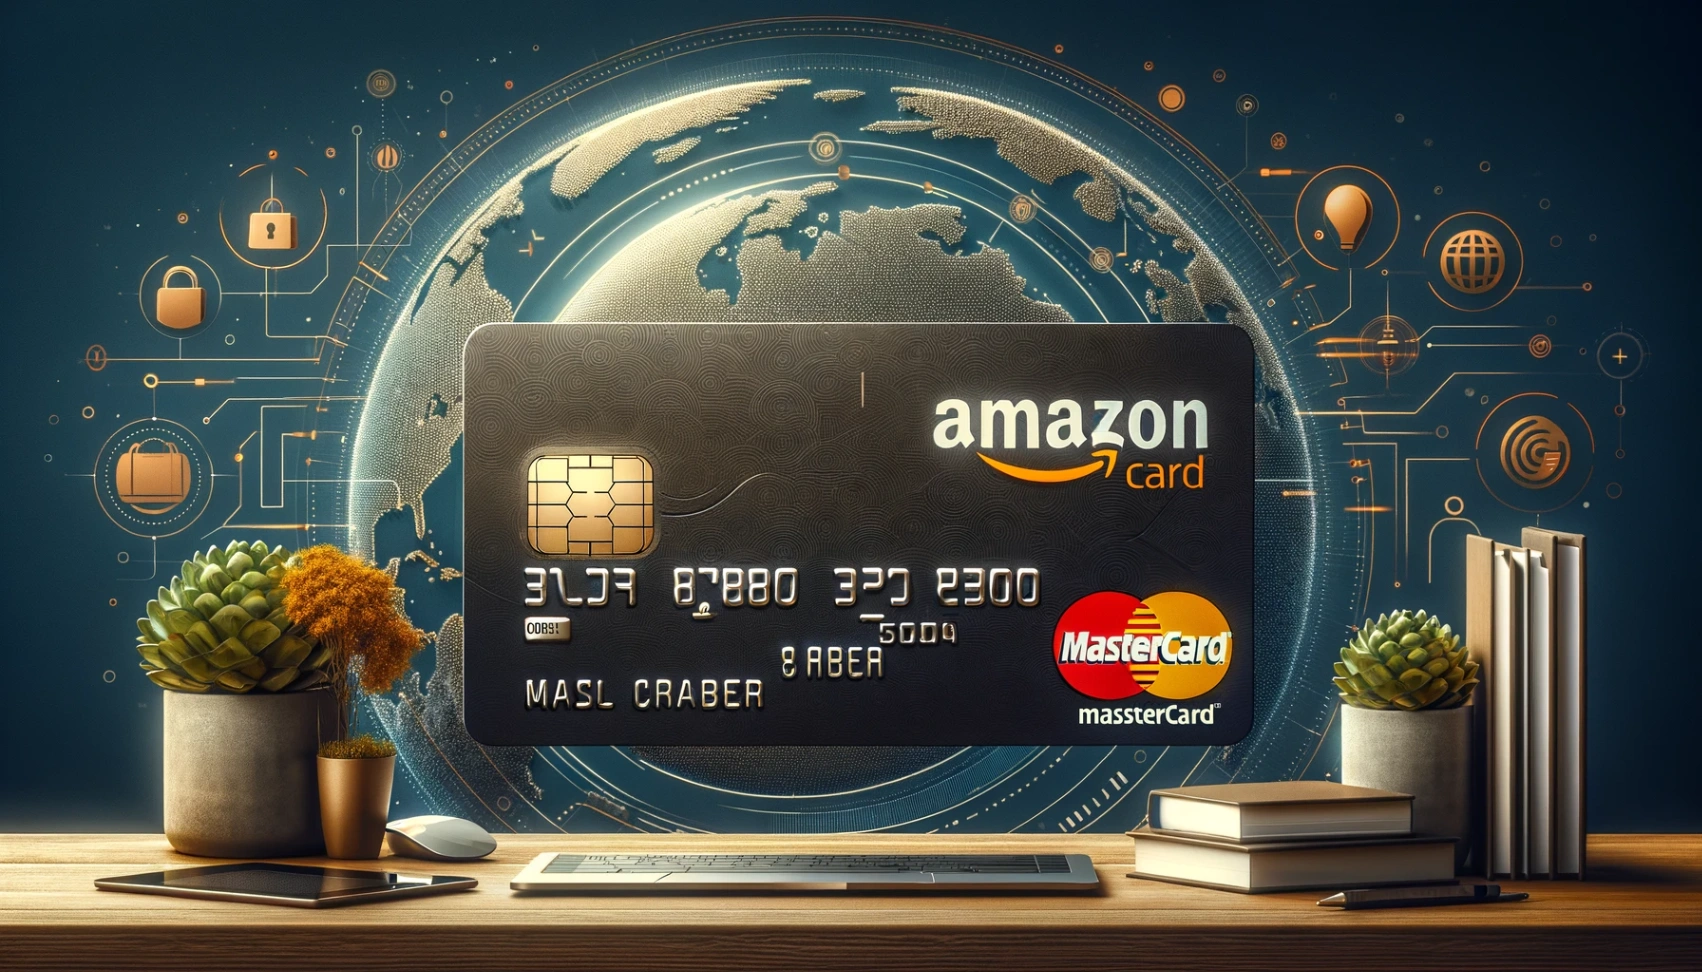 Amazon Mastercard Card - Learn How to Easily Apply